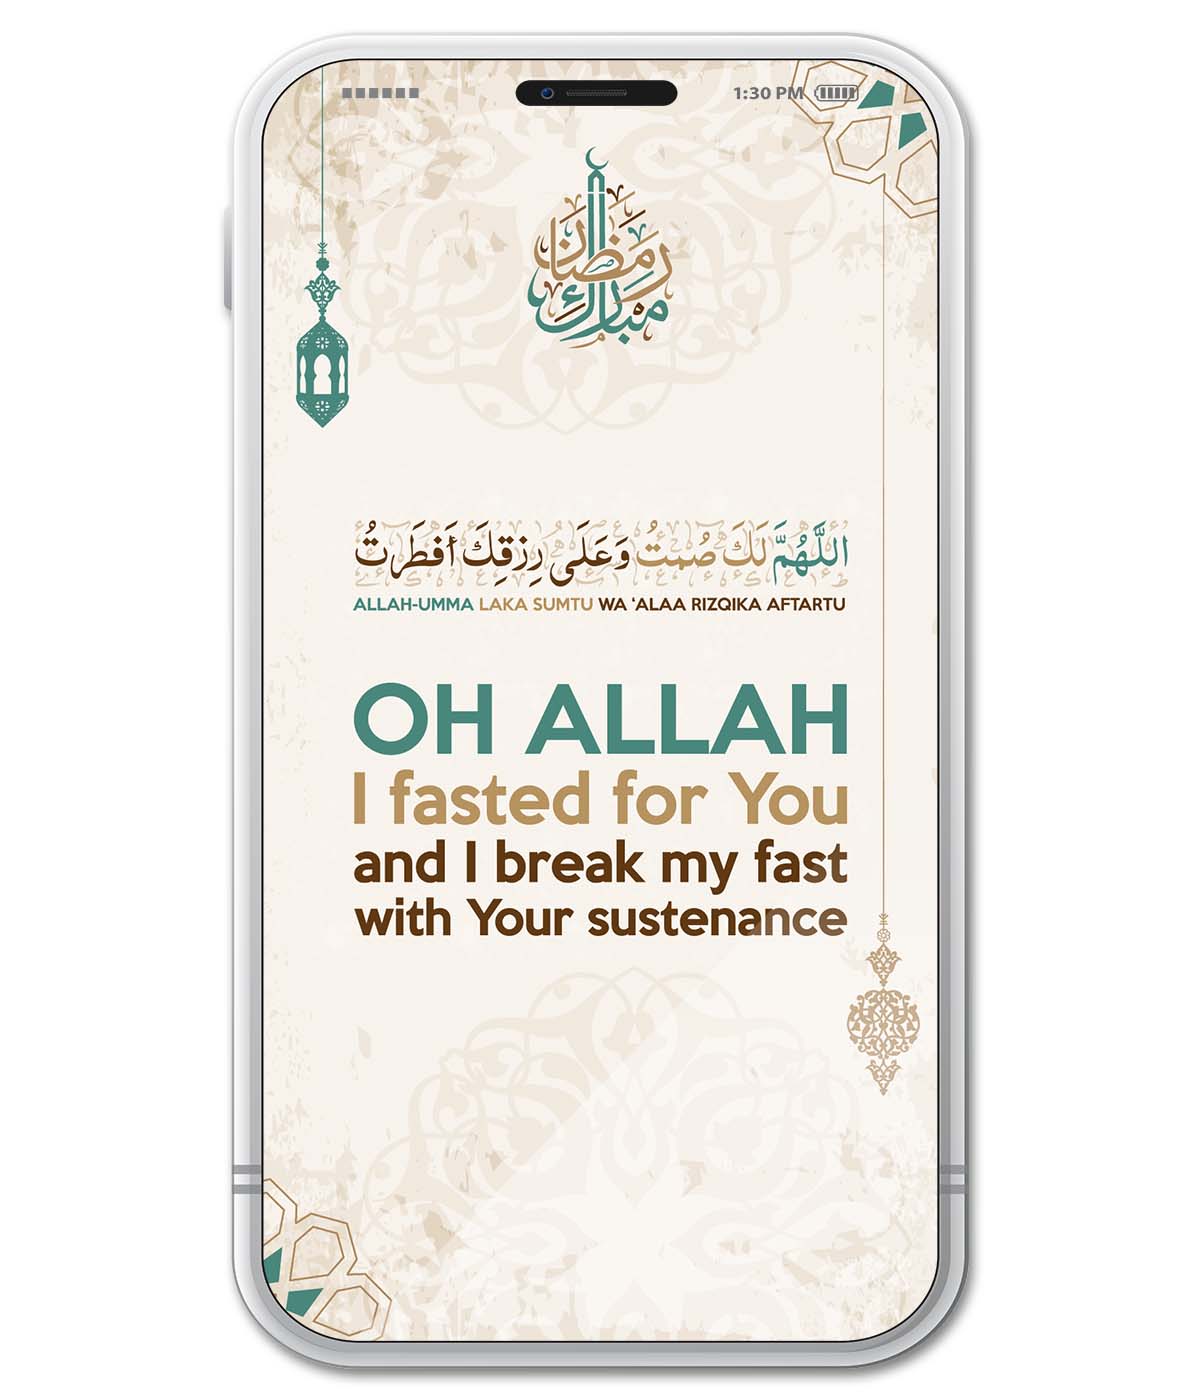 Papyrus Paper Prayer on Breaking The Fast (digital)